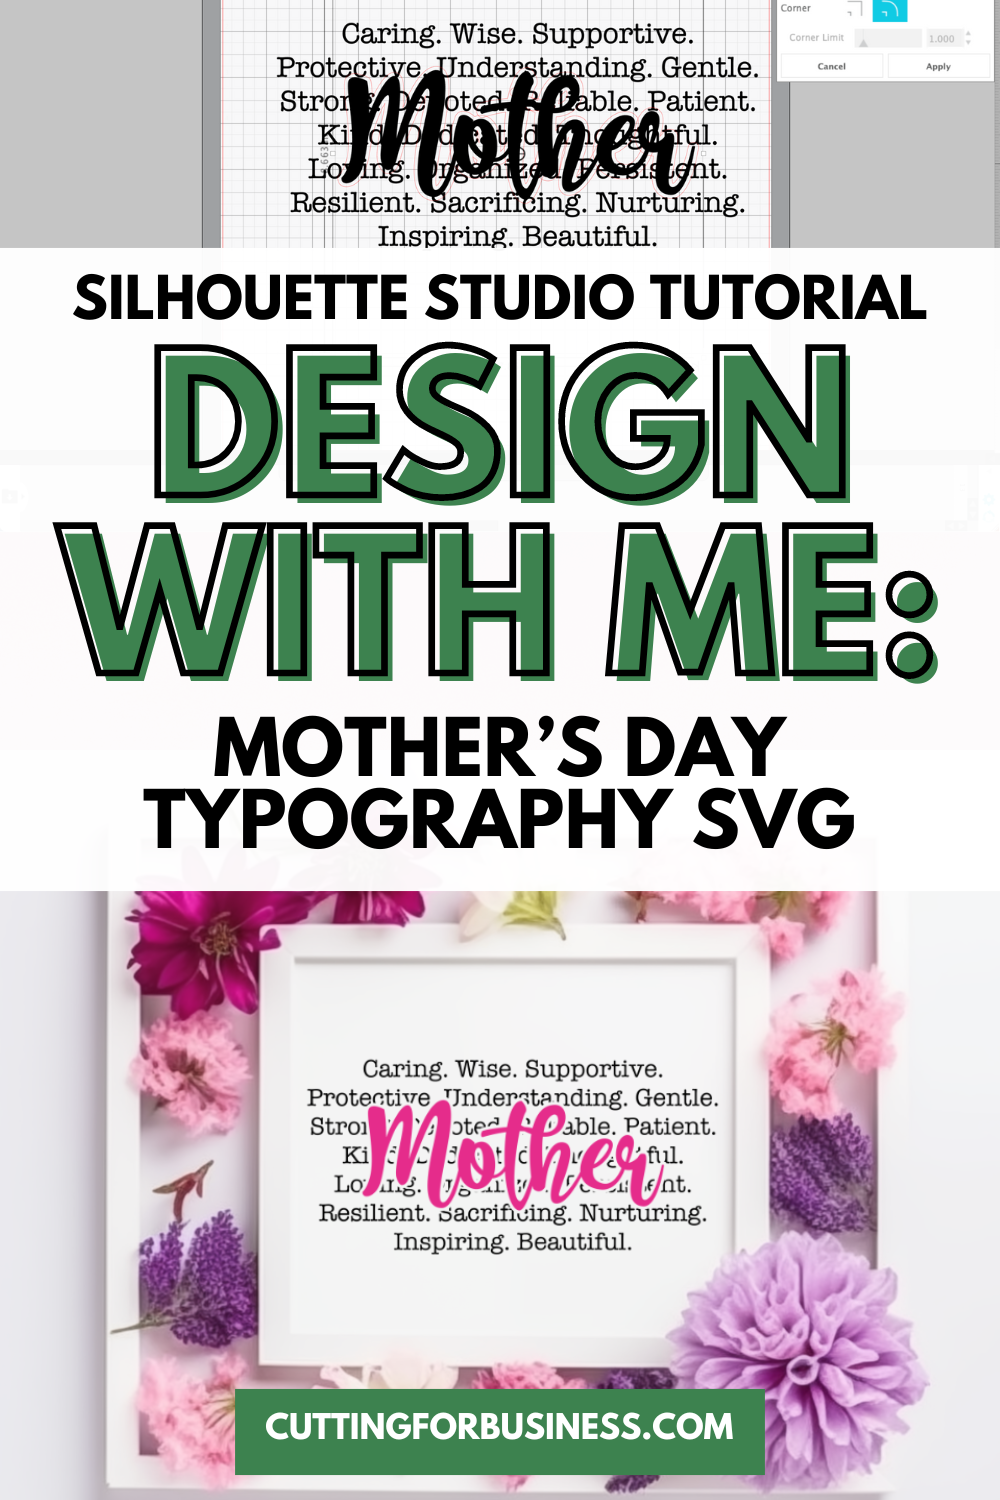 Tutorial - Mother's Day SVG - cuttingforbusiness.com